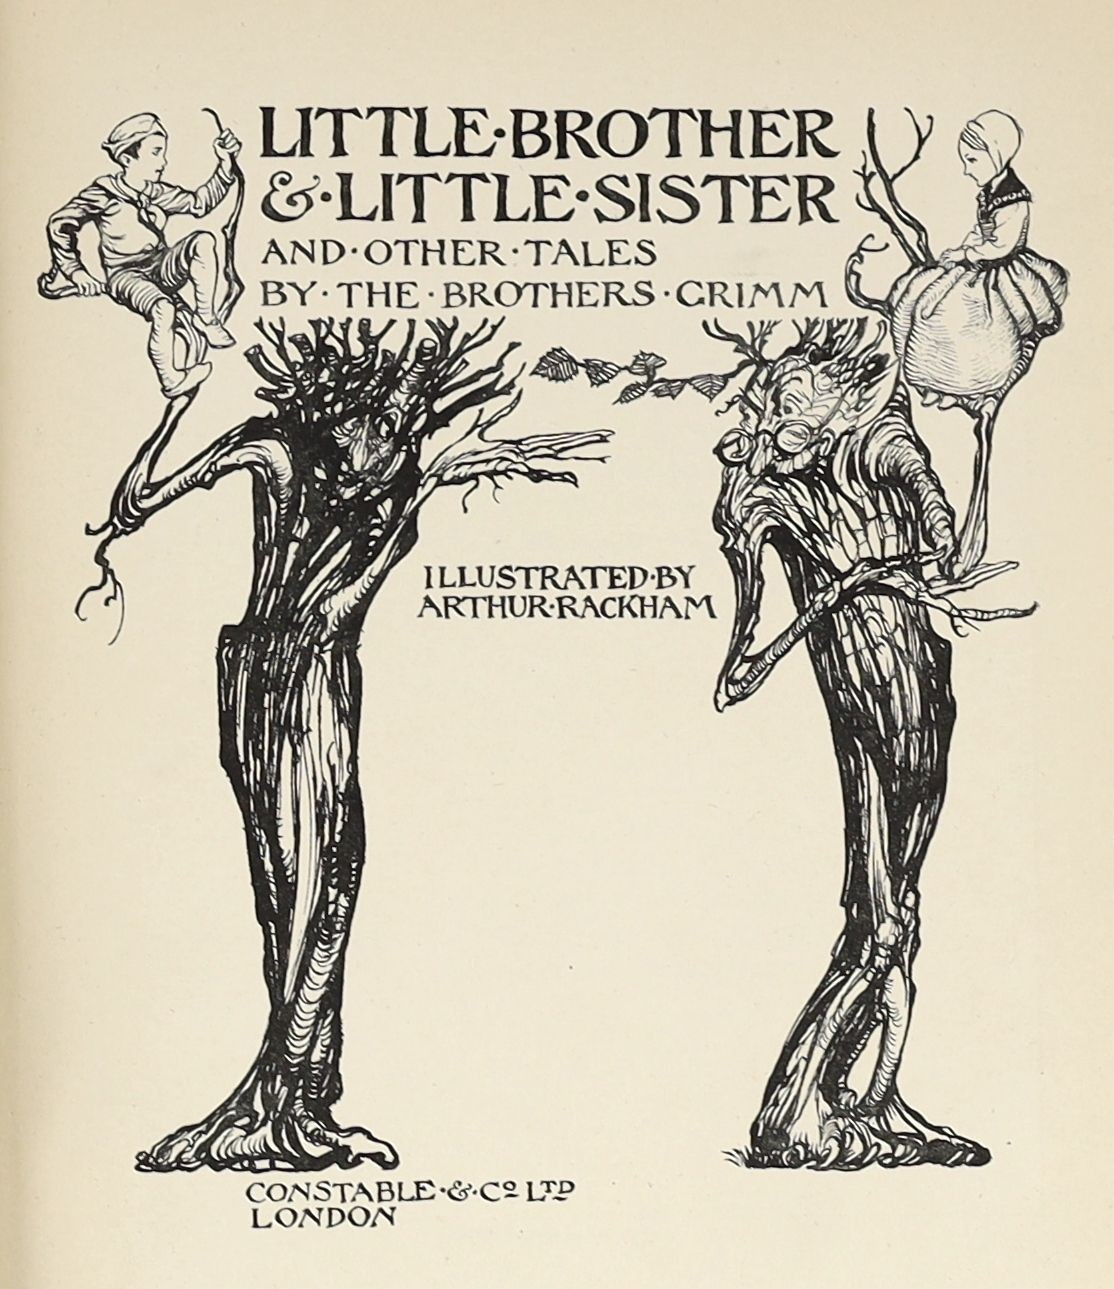 Grimm, Jacob and Wilhem - Little Brother & Little Sister, with frontis and 11 tipped-in colour illustrations by Arthur Rackham, 4to, green cloth gilt, Constable, London, 1917